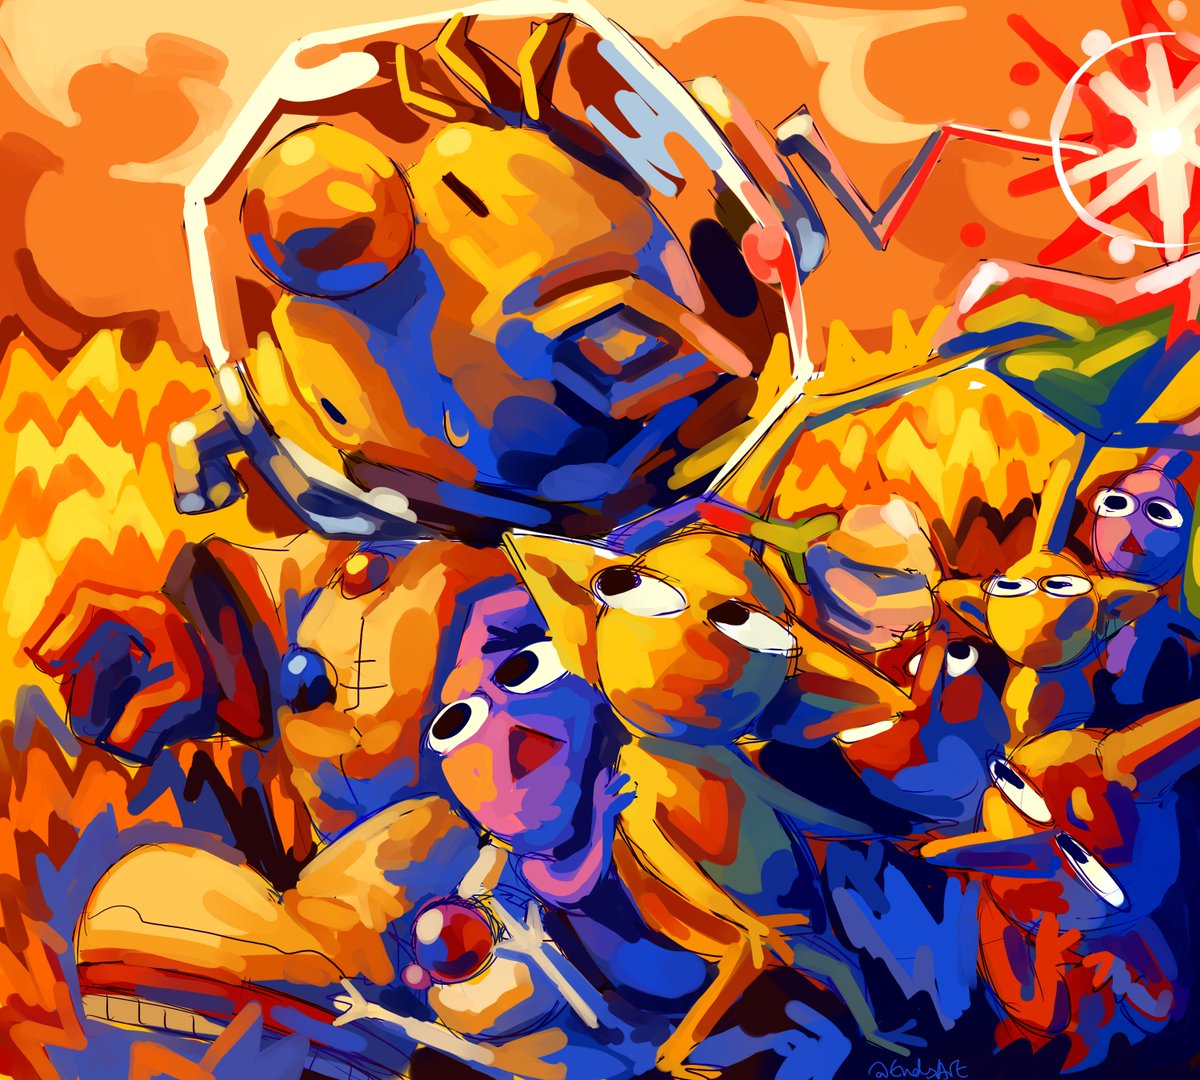 「friendship and sunsets  #pikmin」|end 💥 eyestrain ⚠️NEW comms 📌のイラスト